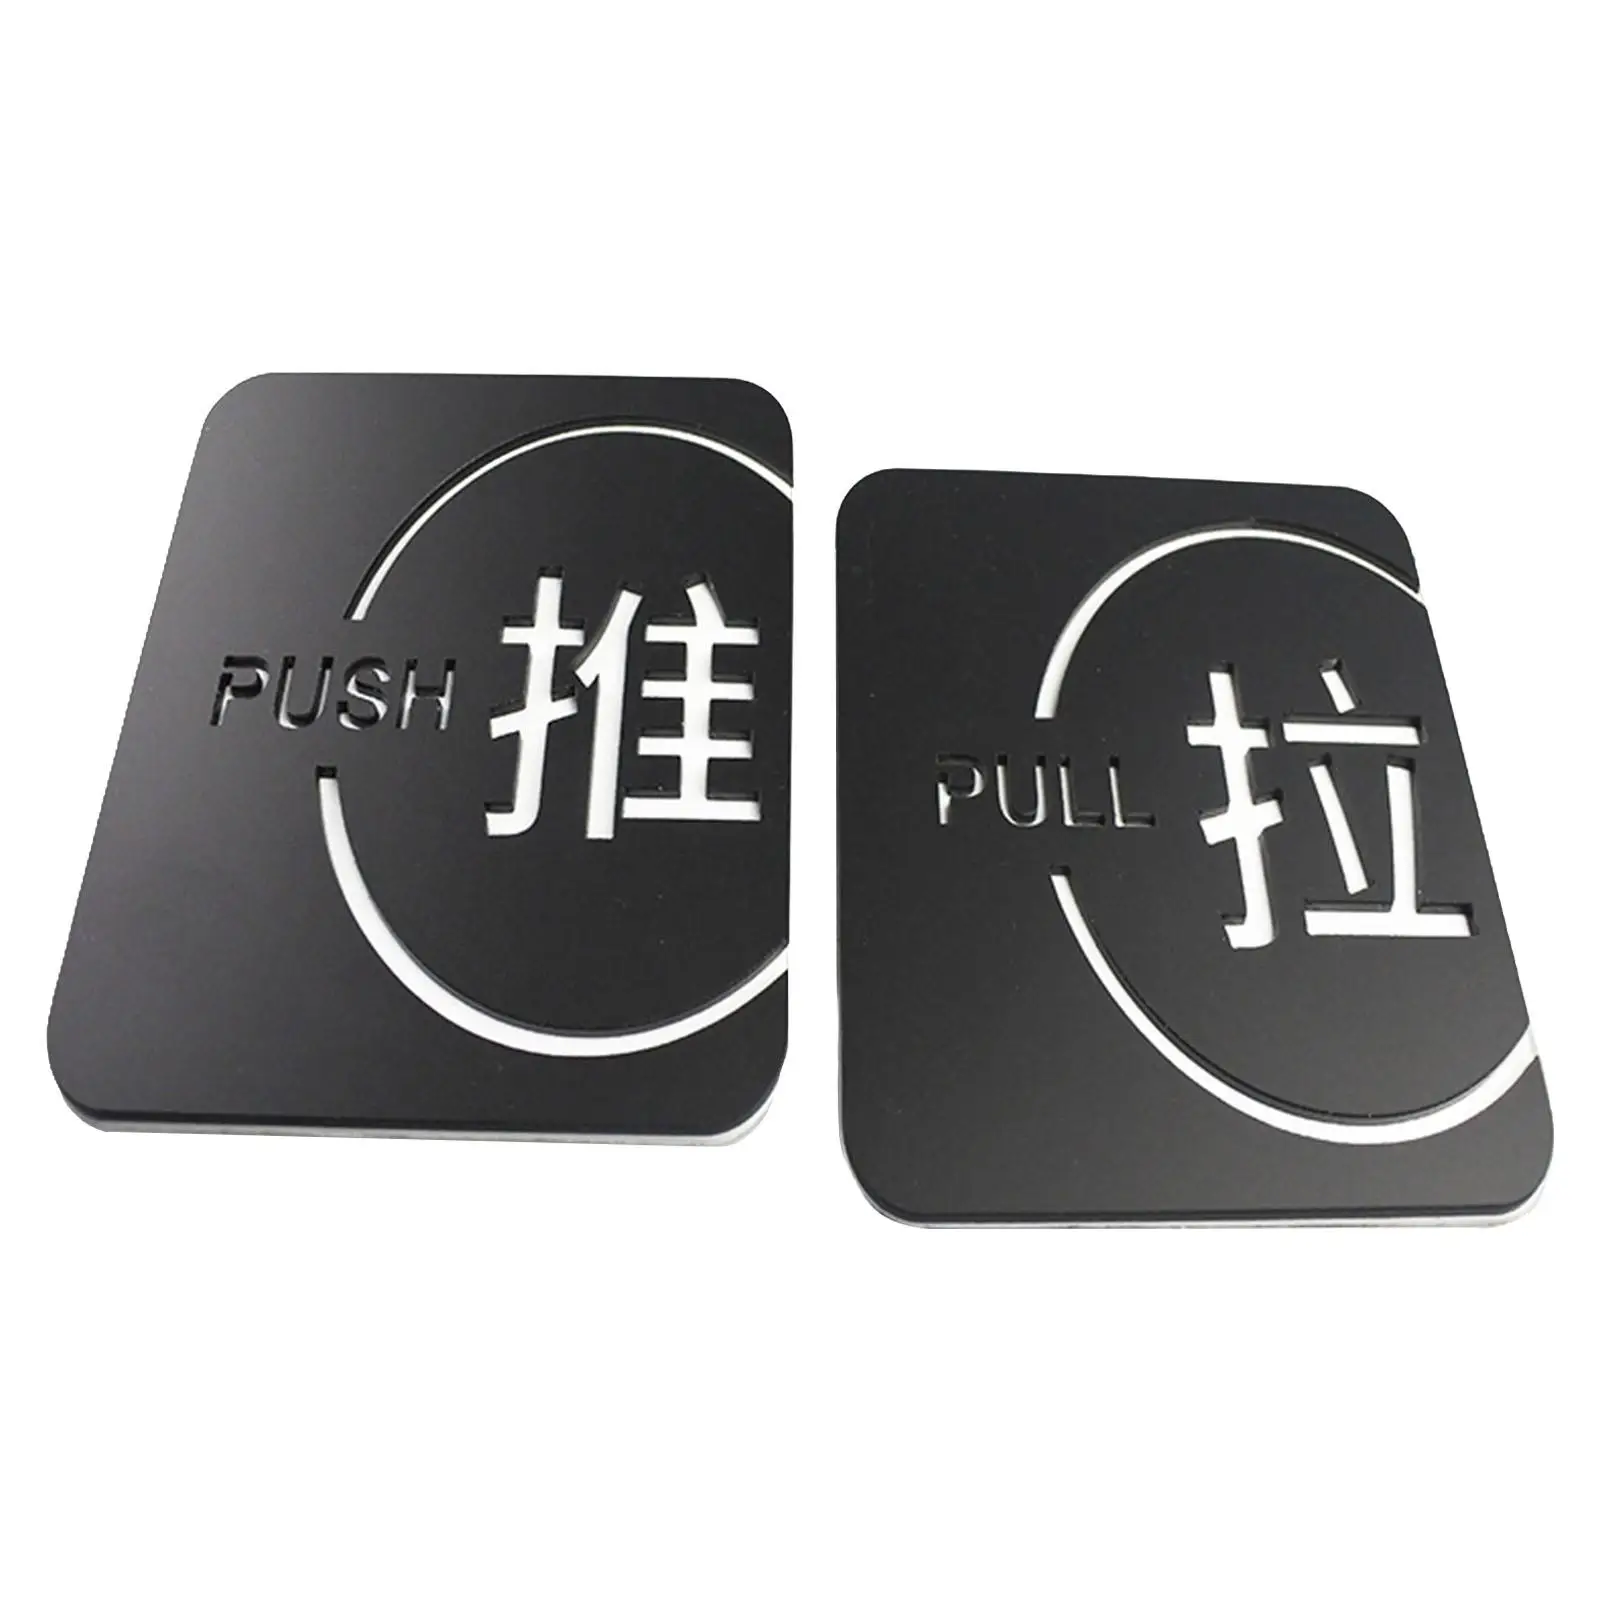 Push and pull stickers, door hangers, fade resistant signage for restaurants,